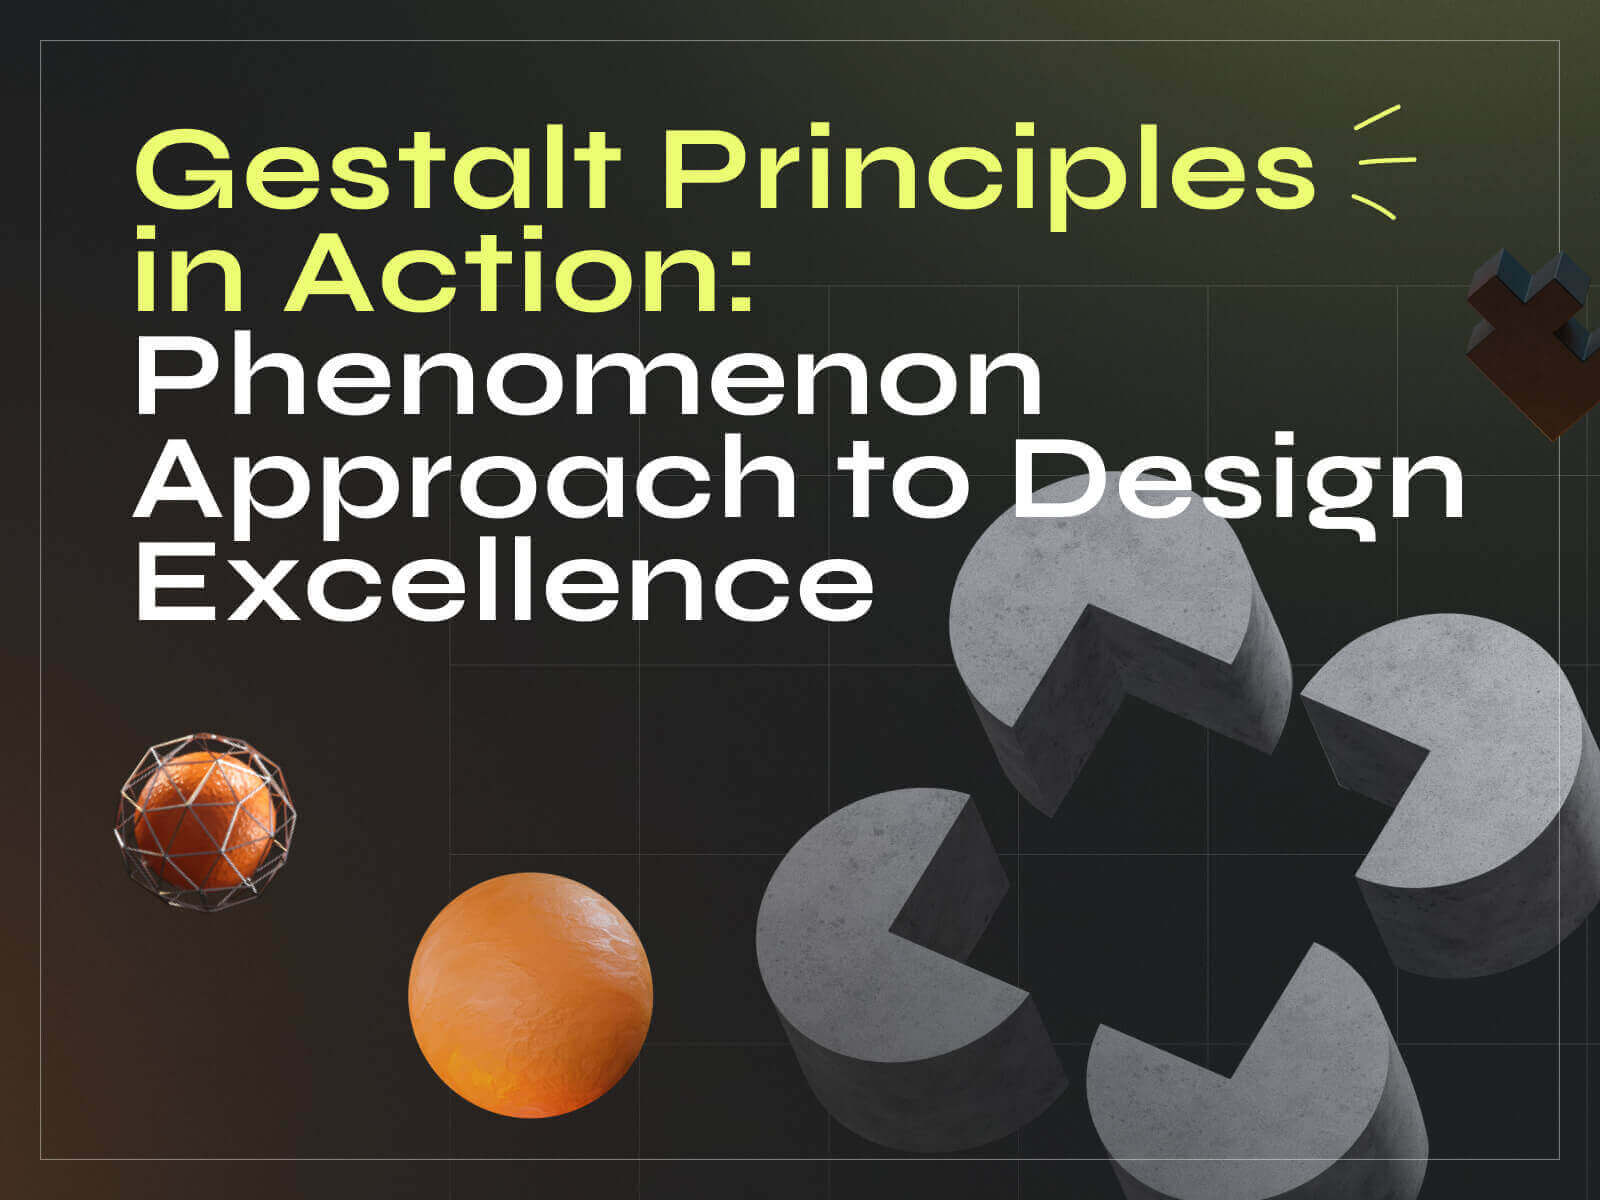 Gestalt Principles in Action: Phenomenon Approach to Design Excellence - Photo 